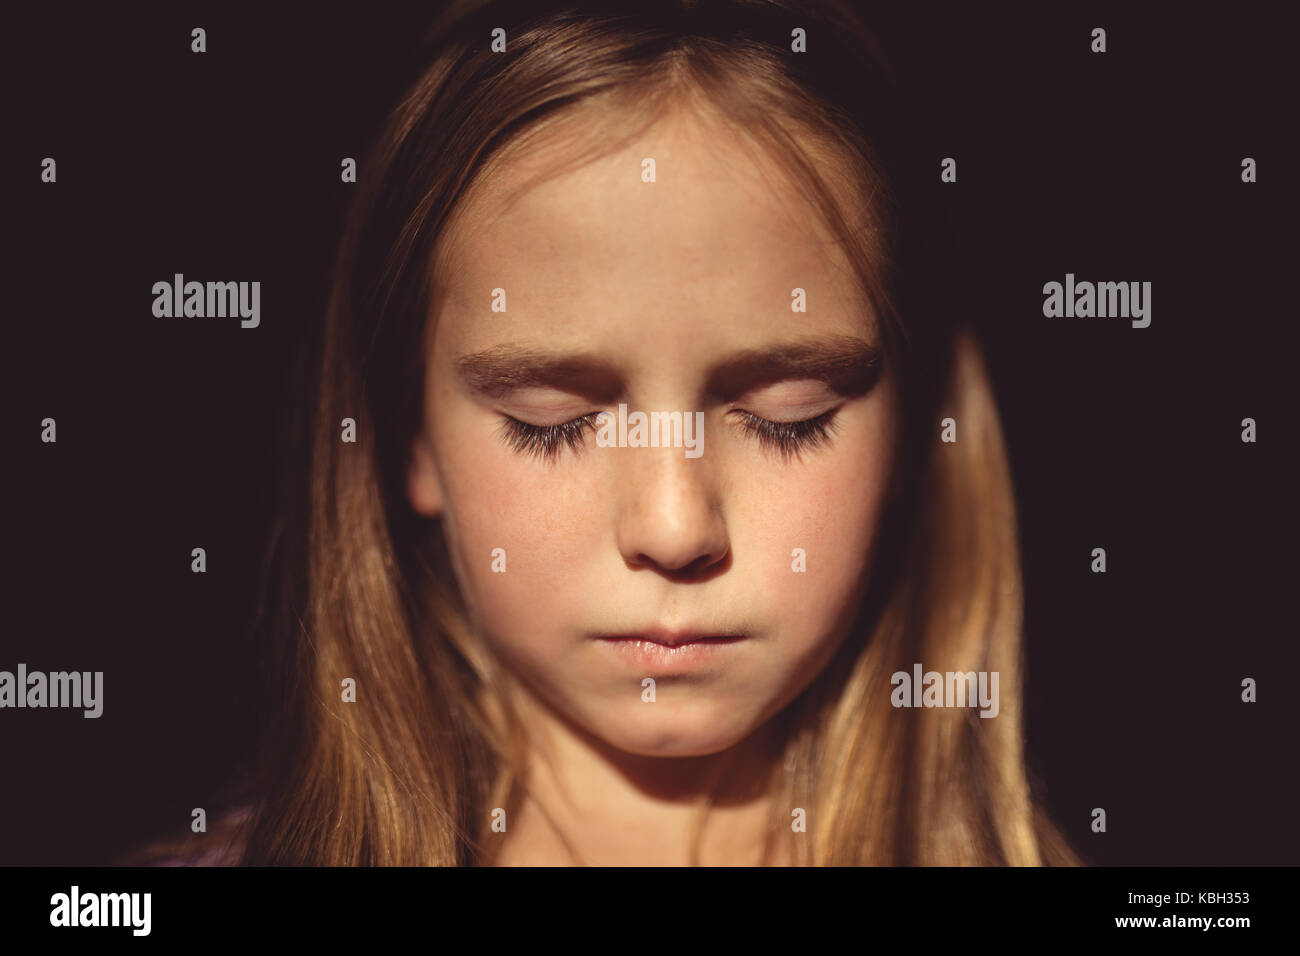 Girl with eyes closed against black background Stock Photo